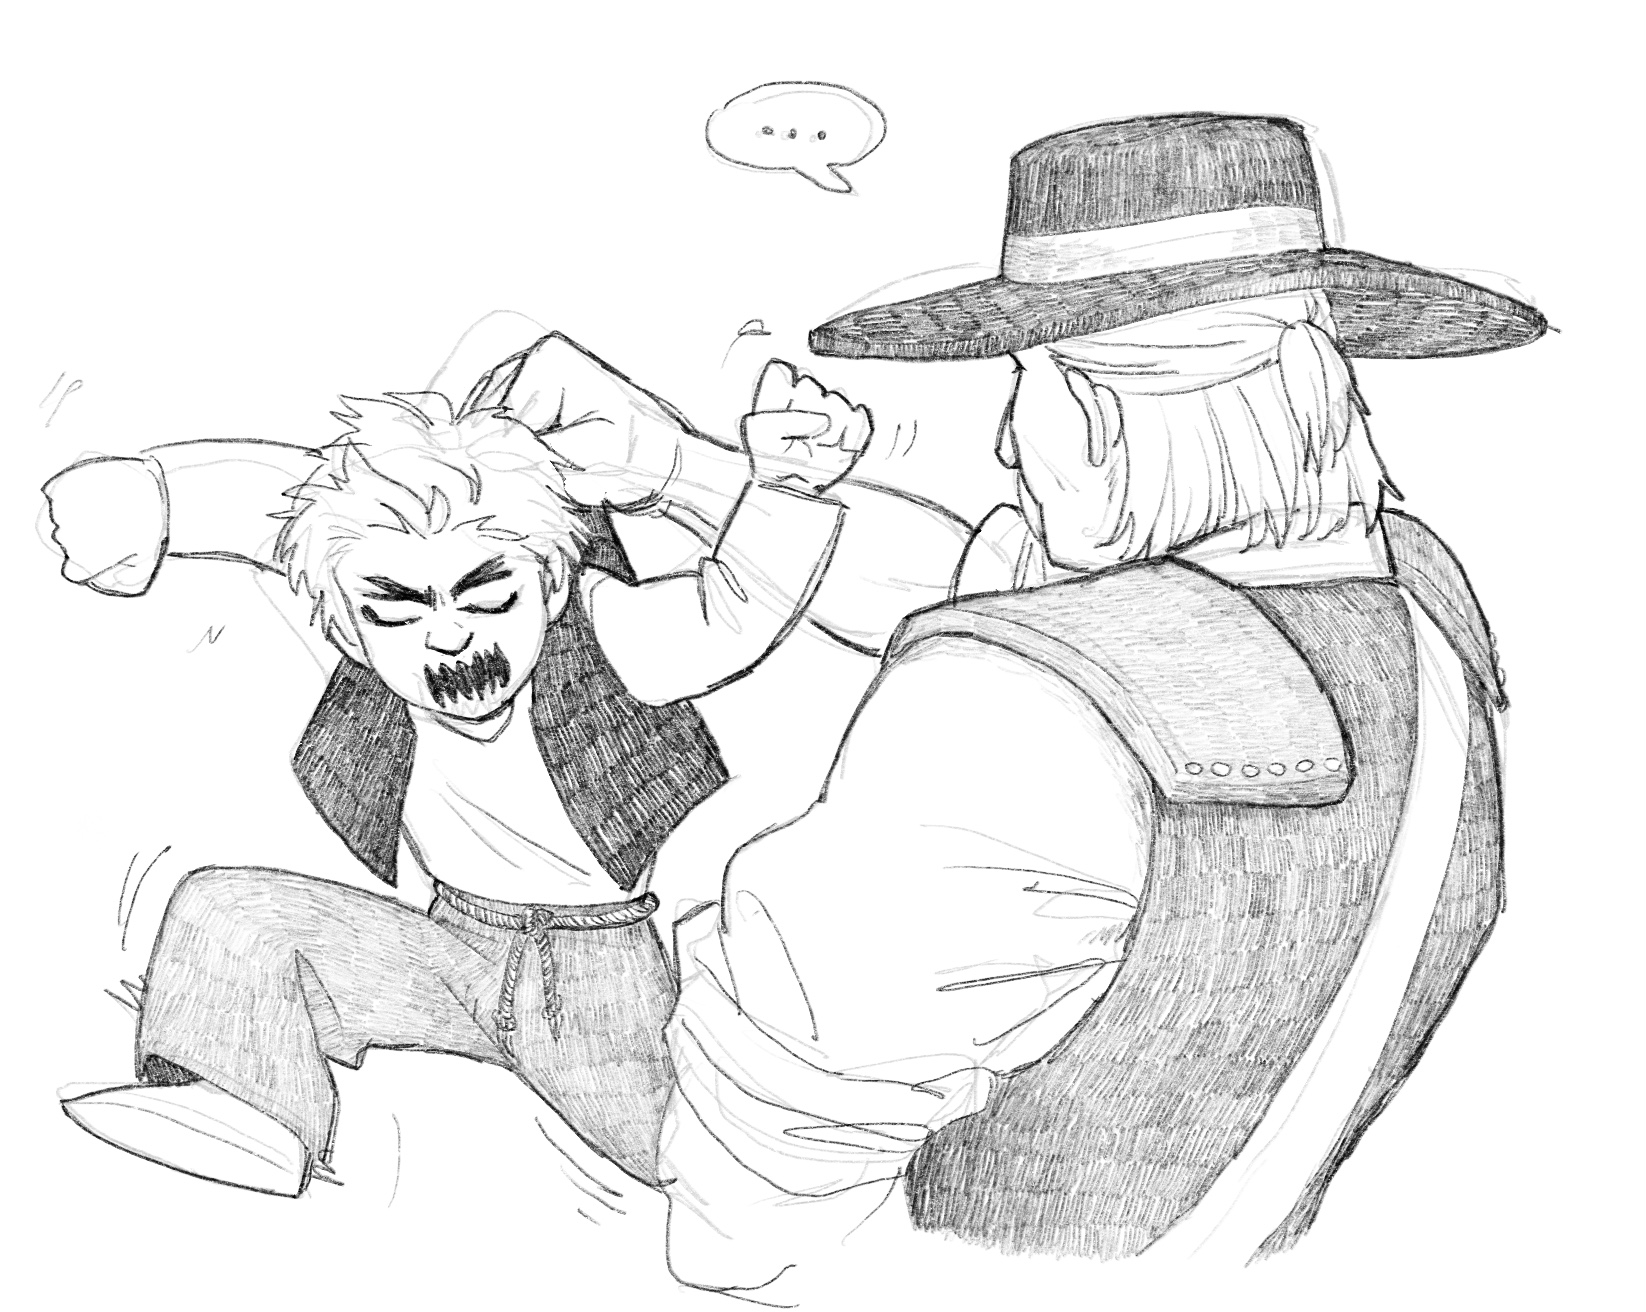 Kid Lambert being held back by a Younger Vesemir like the feral creature from that gif.